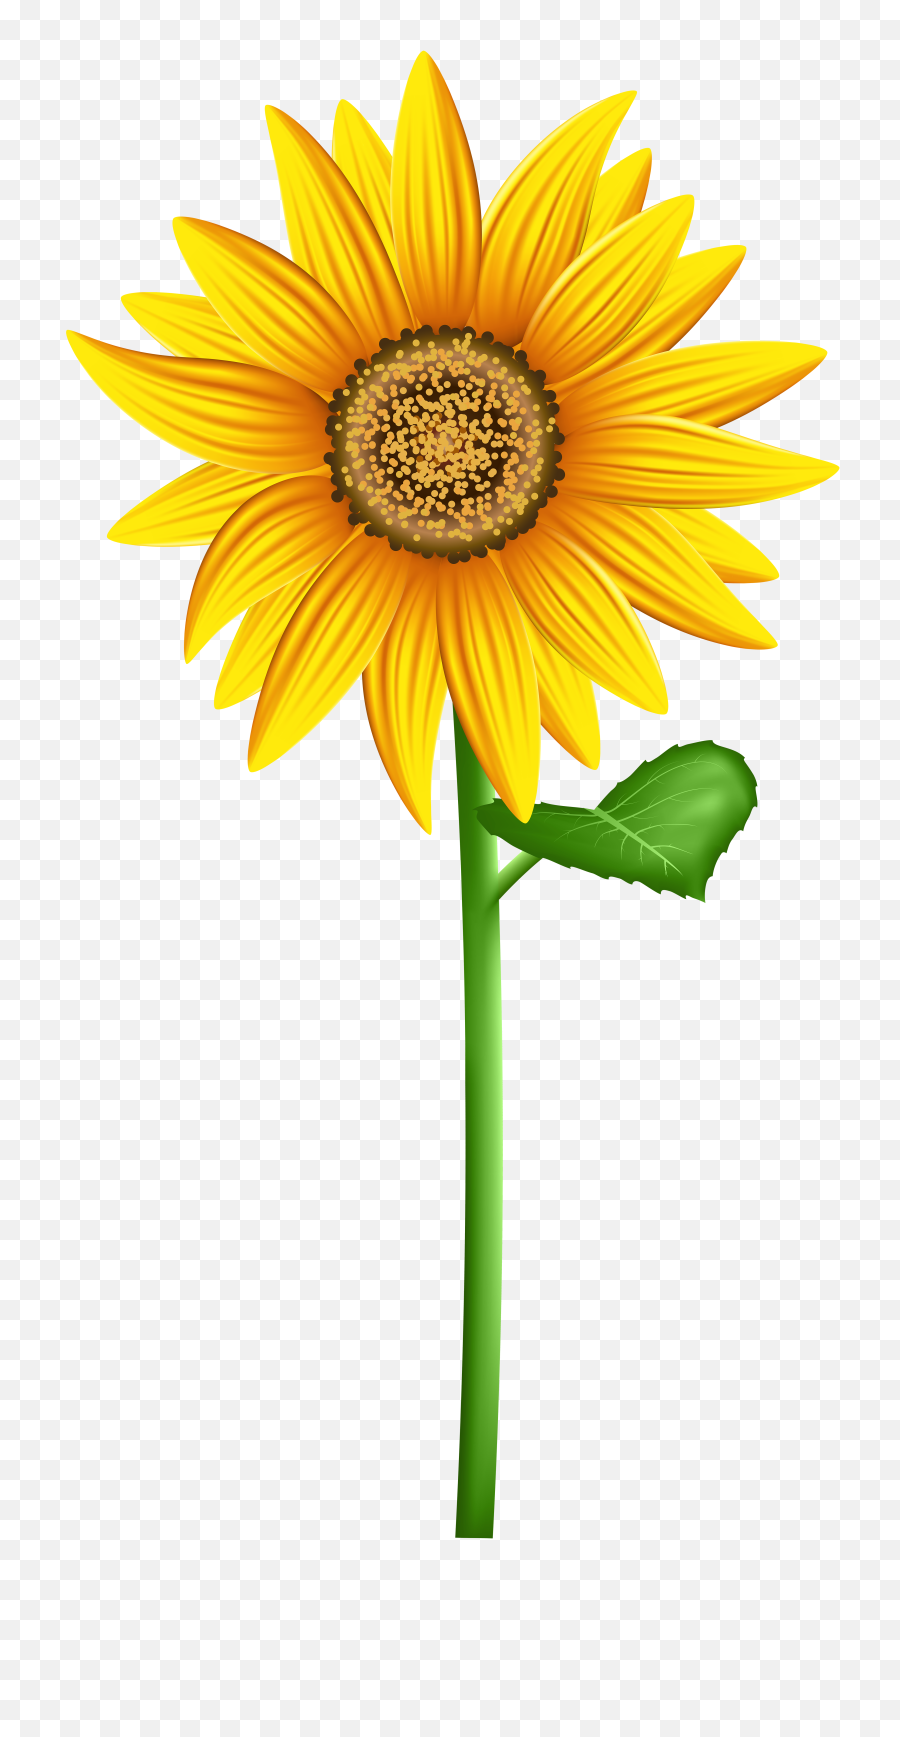 Sunflower Crown Transparent Clipart Png Background